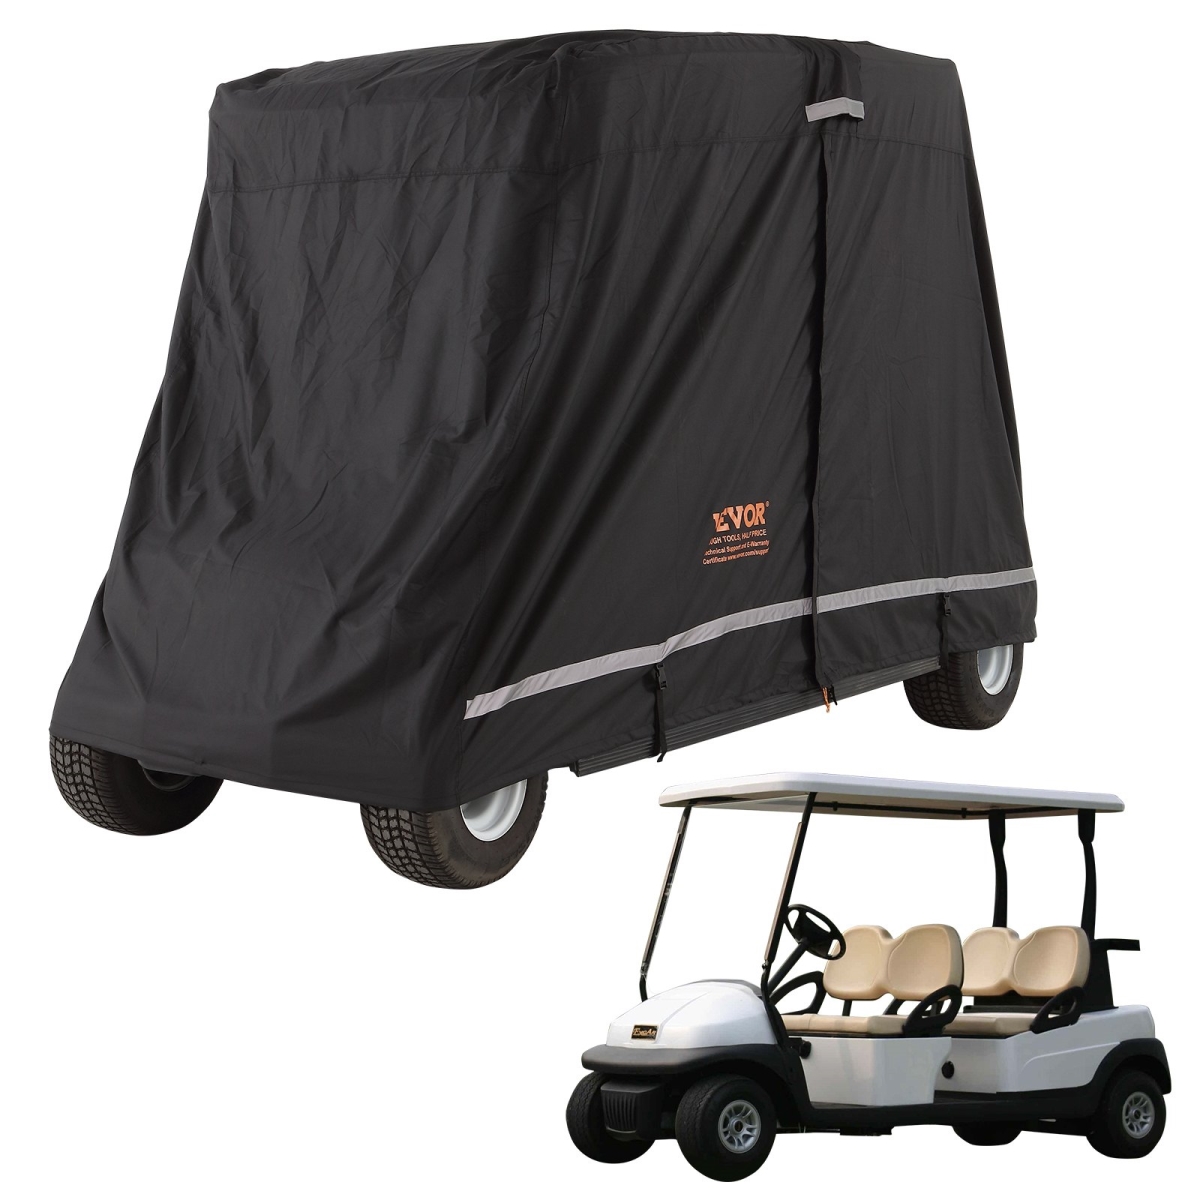 Picture of Vevor QFBSGEFCZGMD7Y5A6V0 4 Passenger Golf Cart Cover&#44; 600D Polyester Full Cover for Most Brand Club Car Covers&#44; Waterproof&#44; Sunproof & Dustproof Outdoor Golf Cart Cover&#44; Black